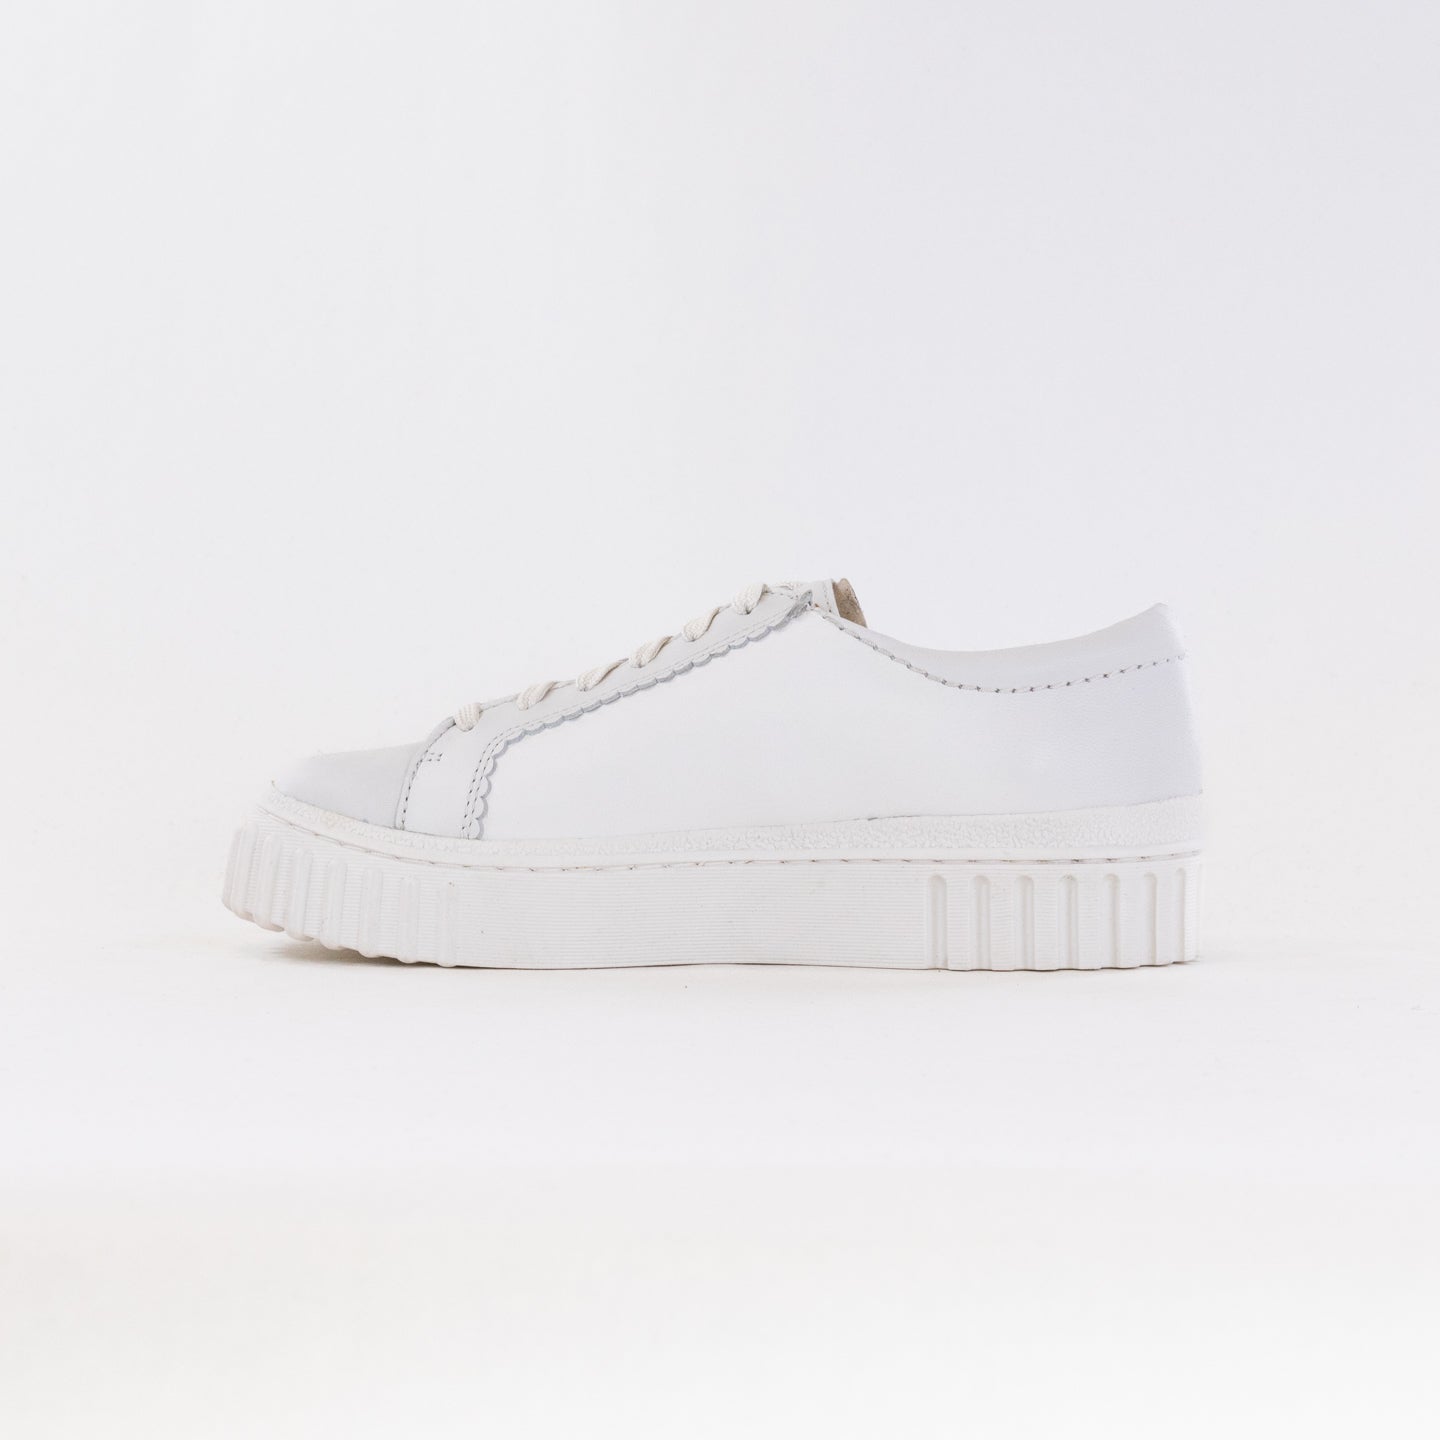 Clarks Mayhill Walk (Women's) - Off White Leather